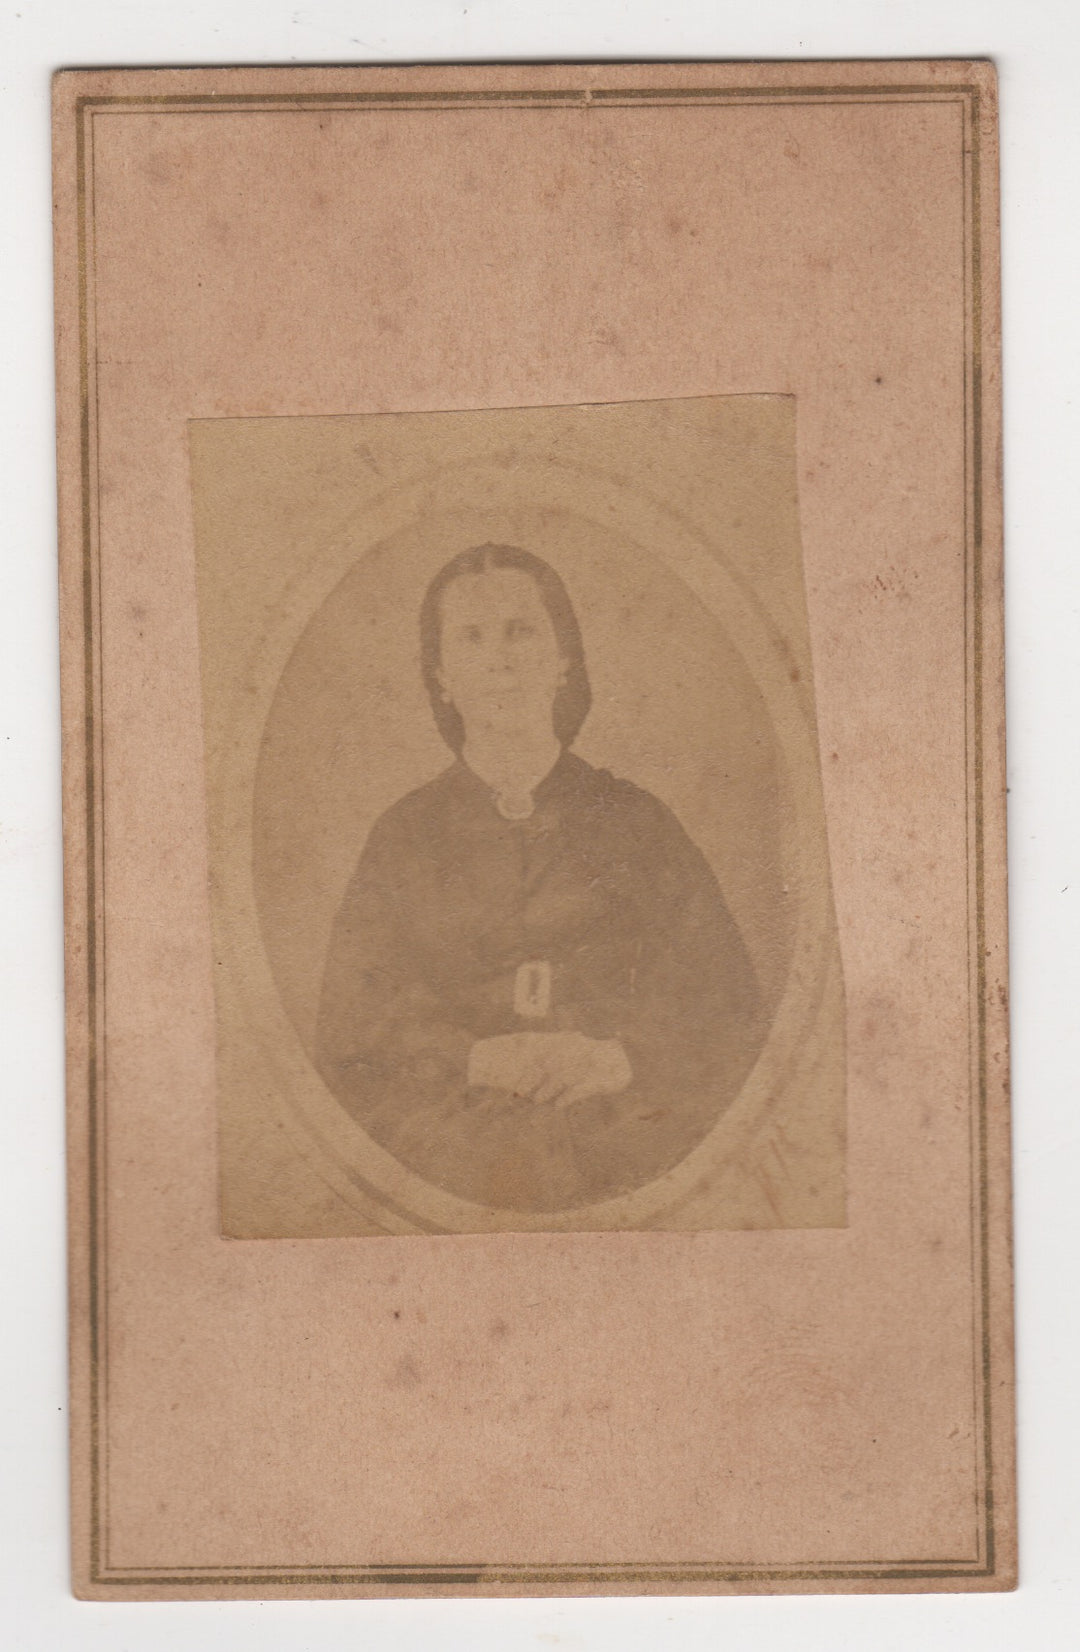 Canadian Woman Antique CDV Photo of an Earlier Daguerreotype or Ambrotype